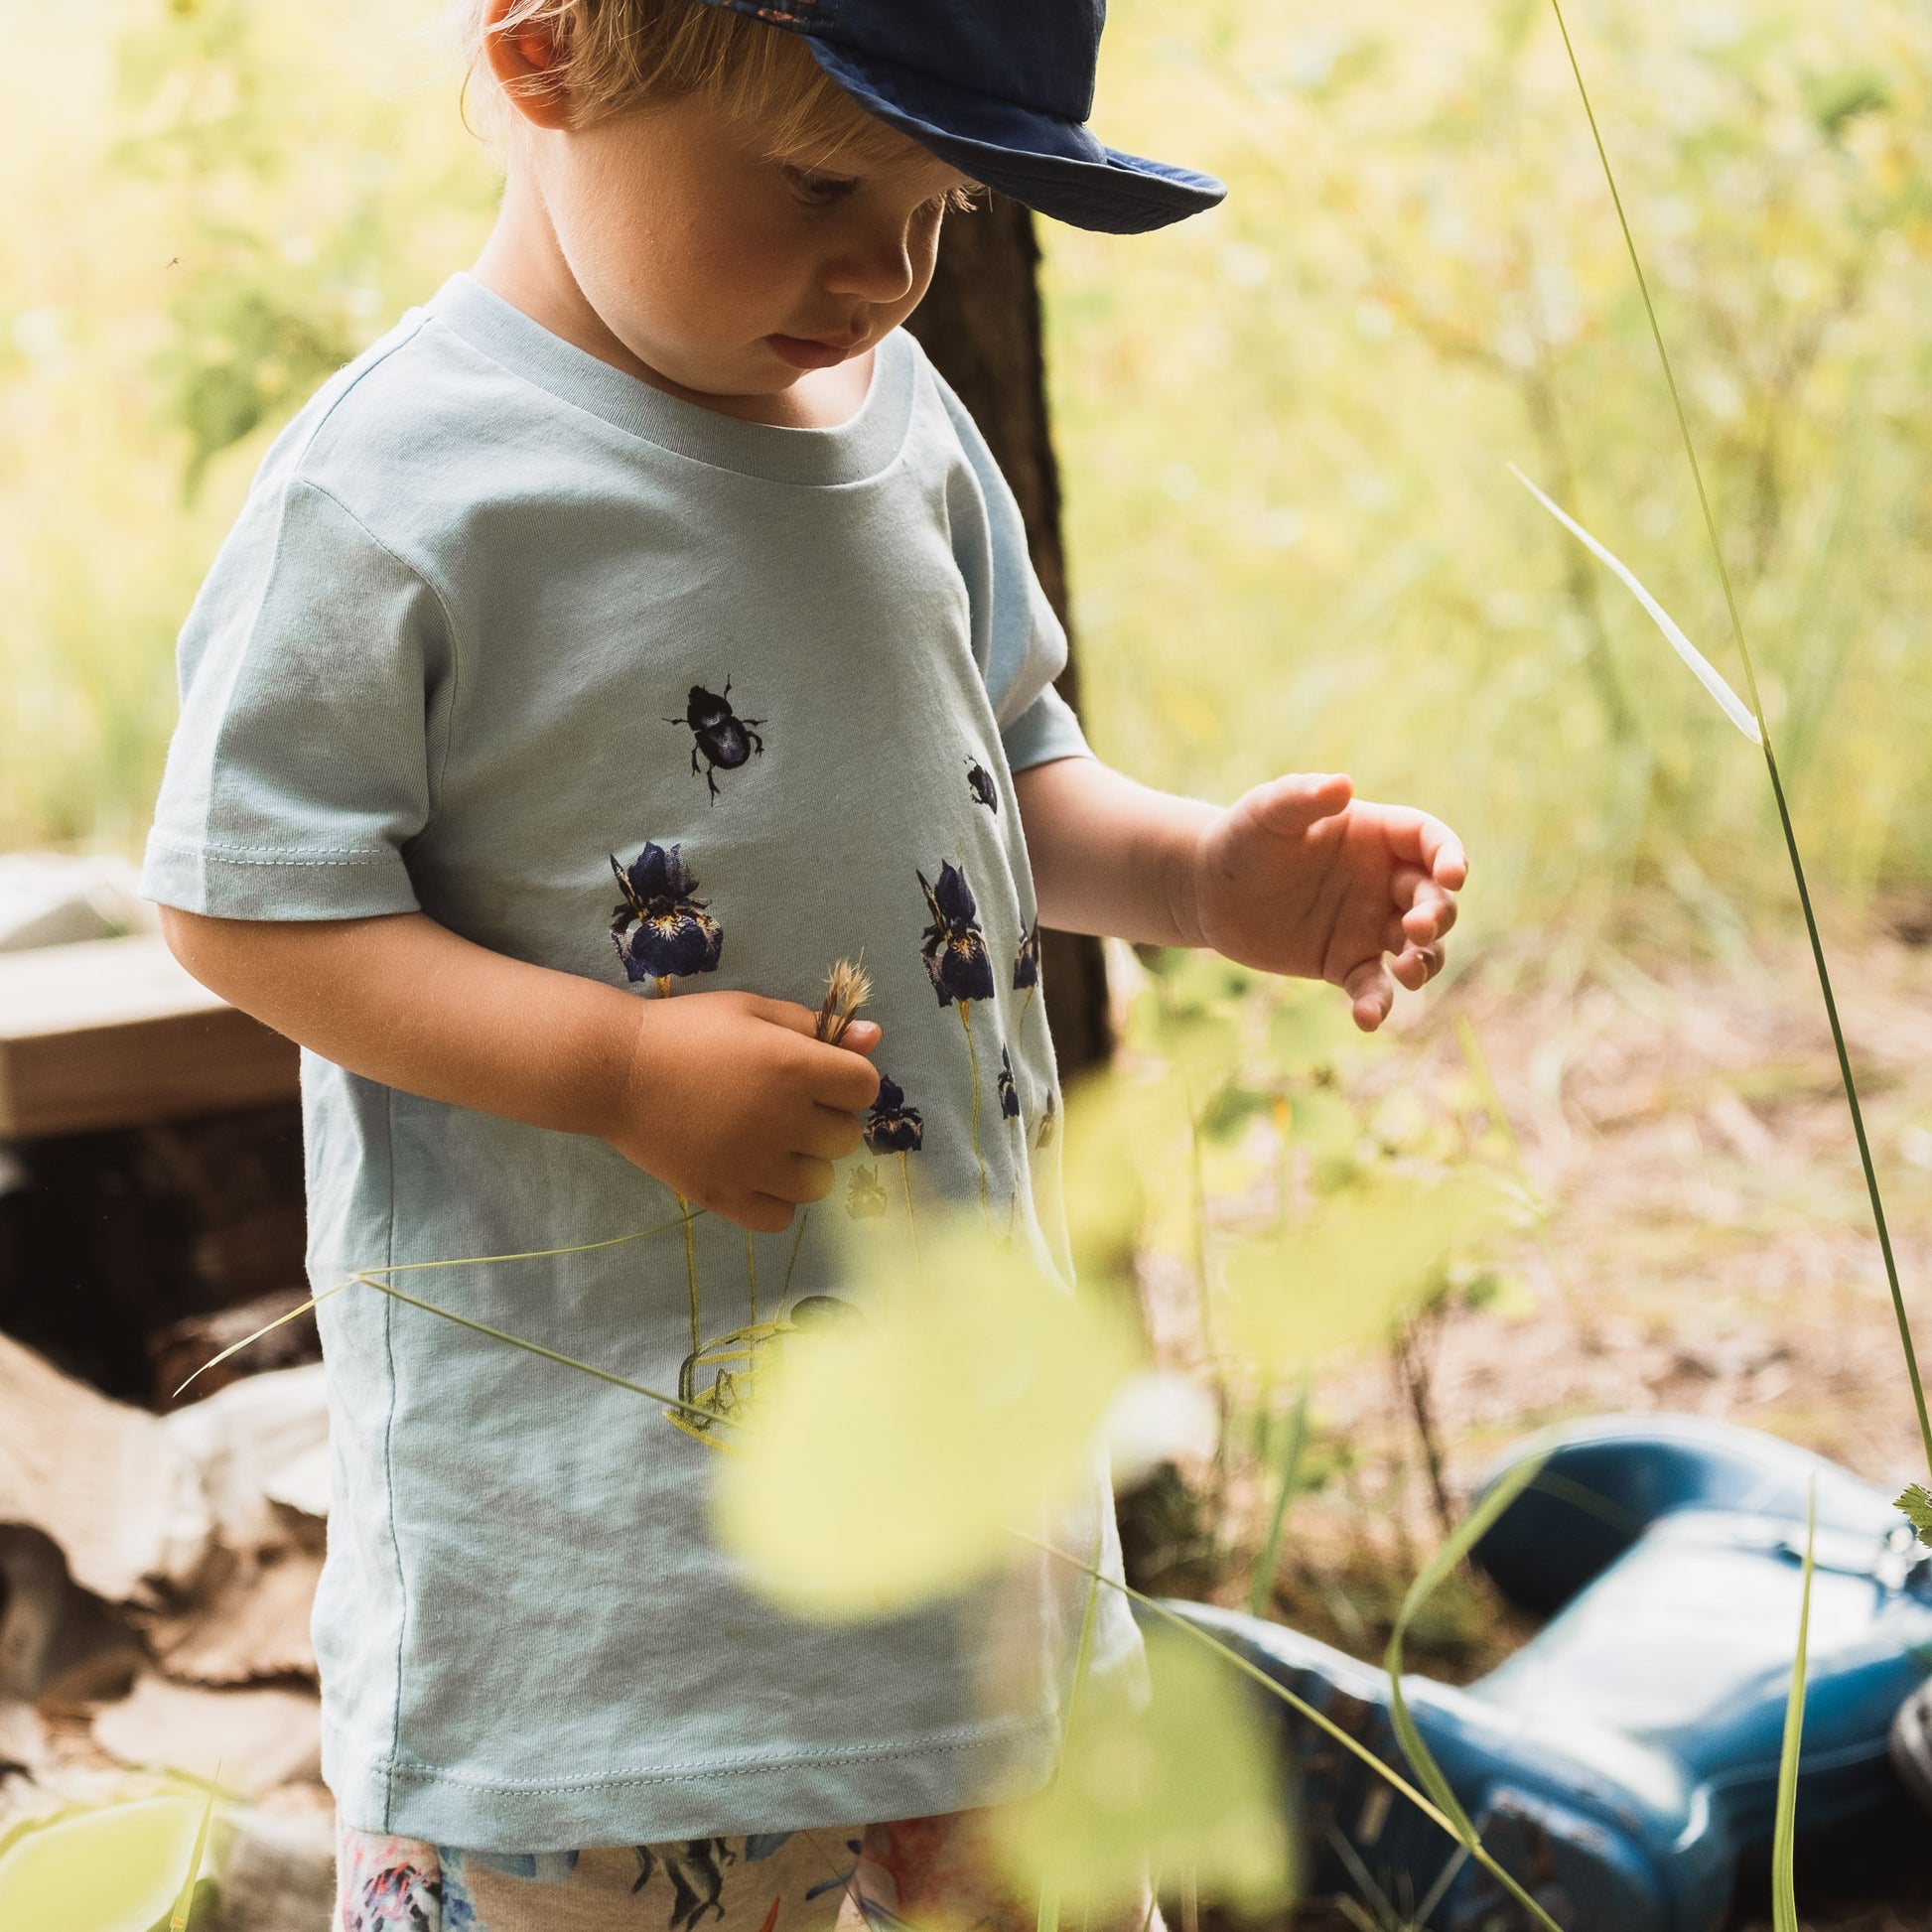 Toddler feeling grass during the Swedish summer. Wearing a blue cap, blue t-shirt with irises and beetles and shorts with fish. In the background there are blue boots and a pile of logs.